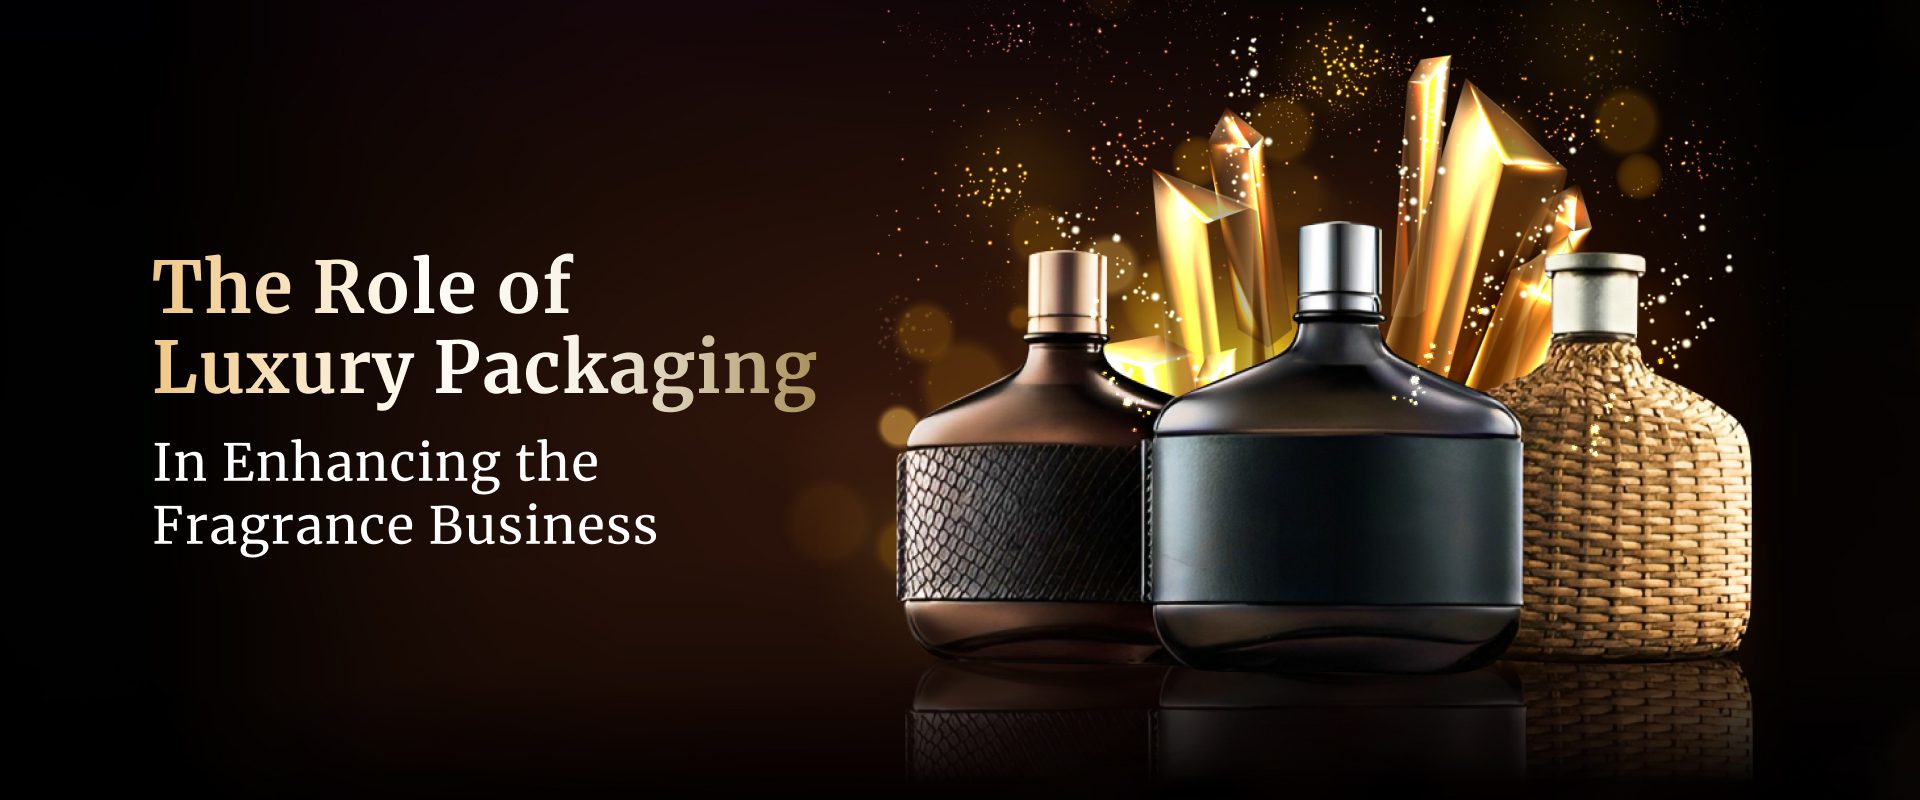 The Role of Luxury Packaging in Enhancing the Fragrance Business